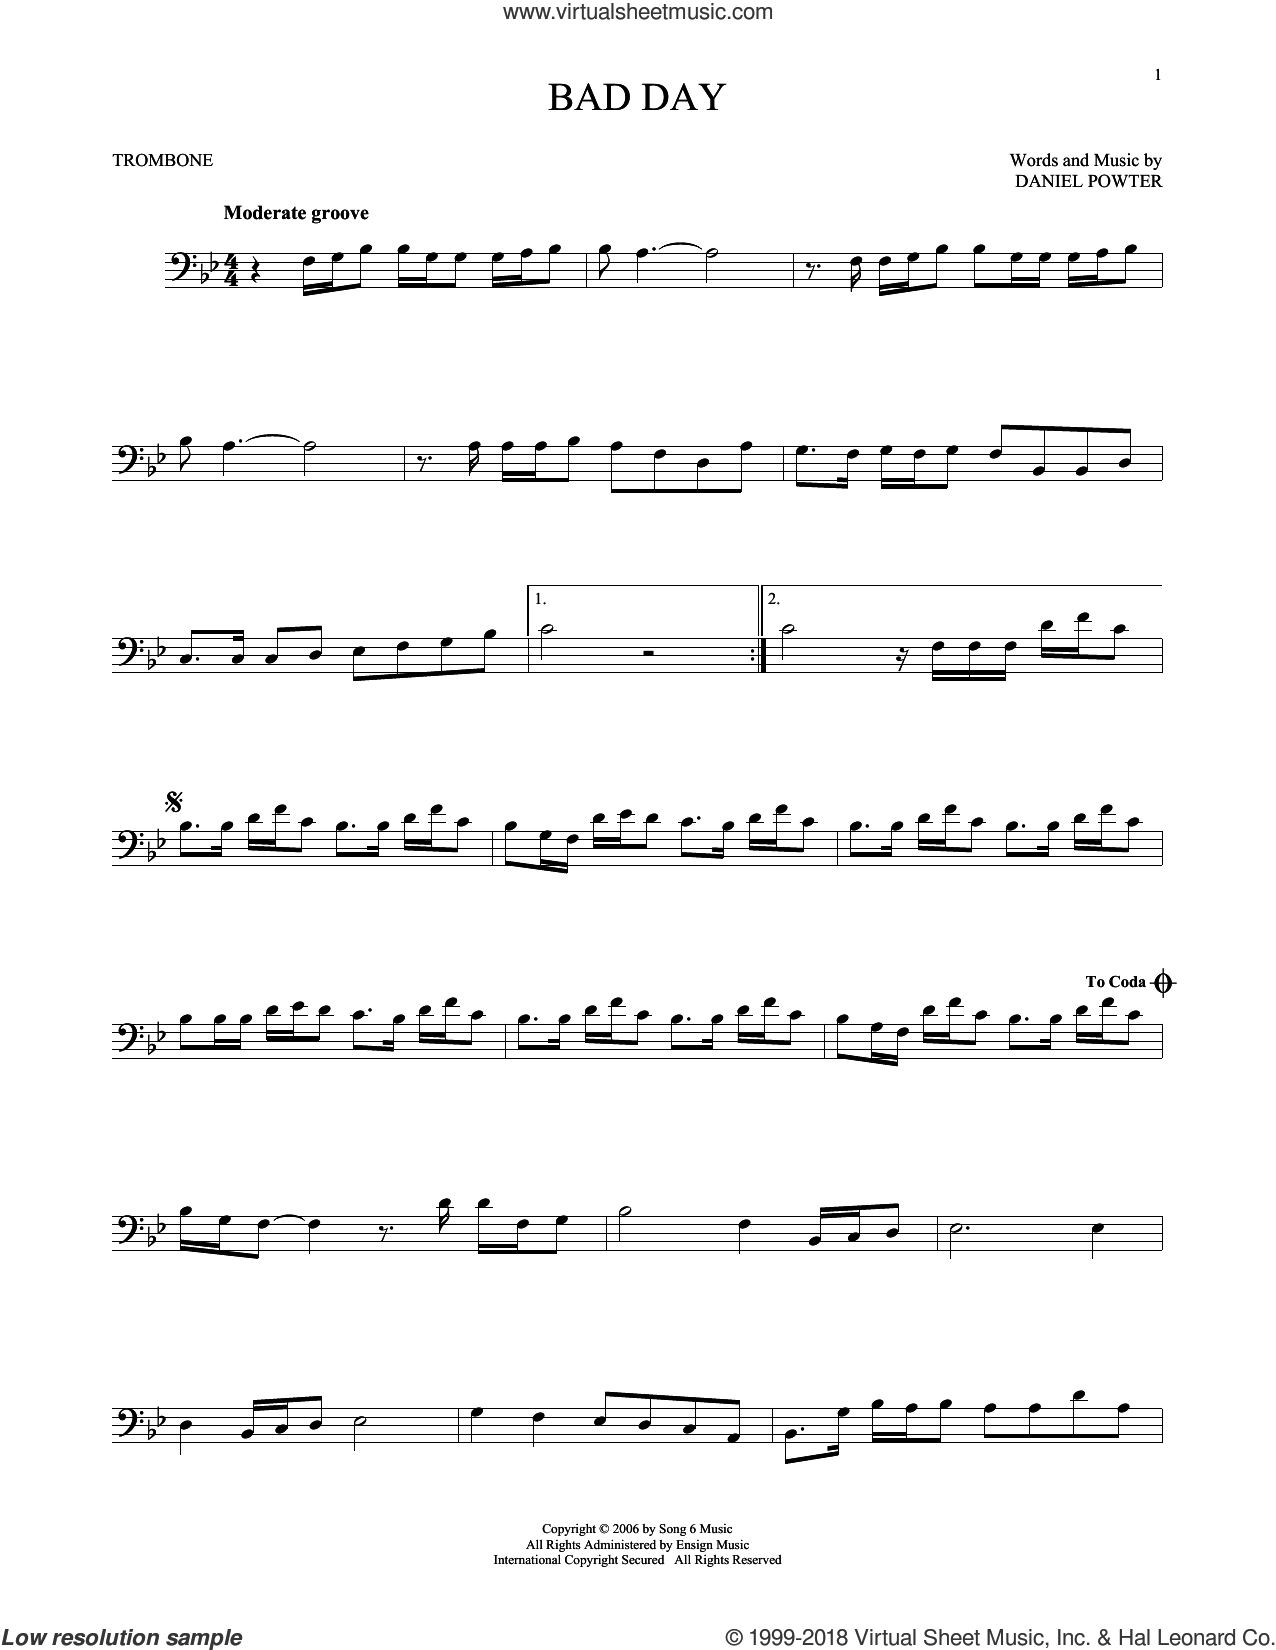 100 Bad Days - Sheet music for Piano